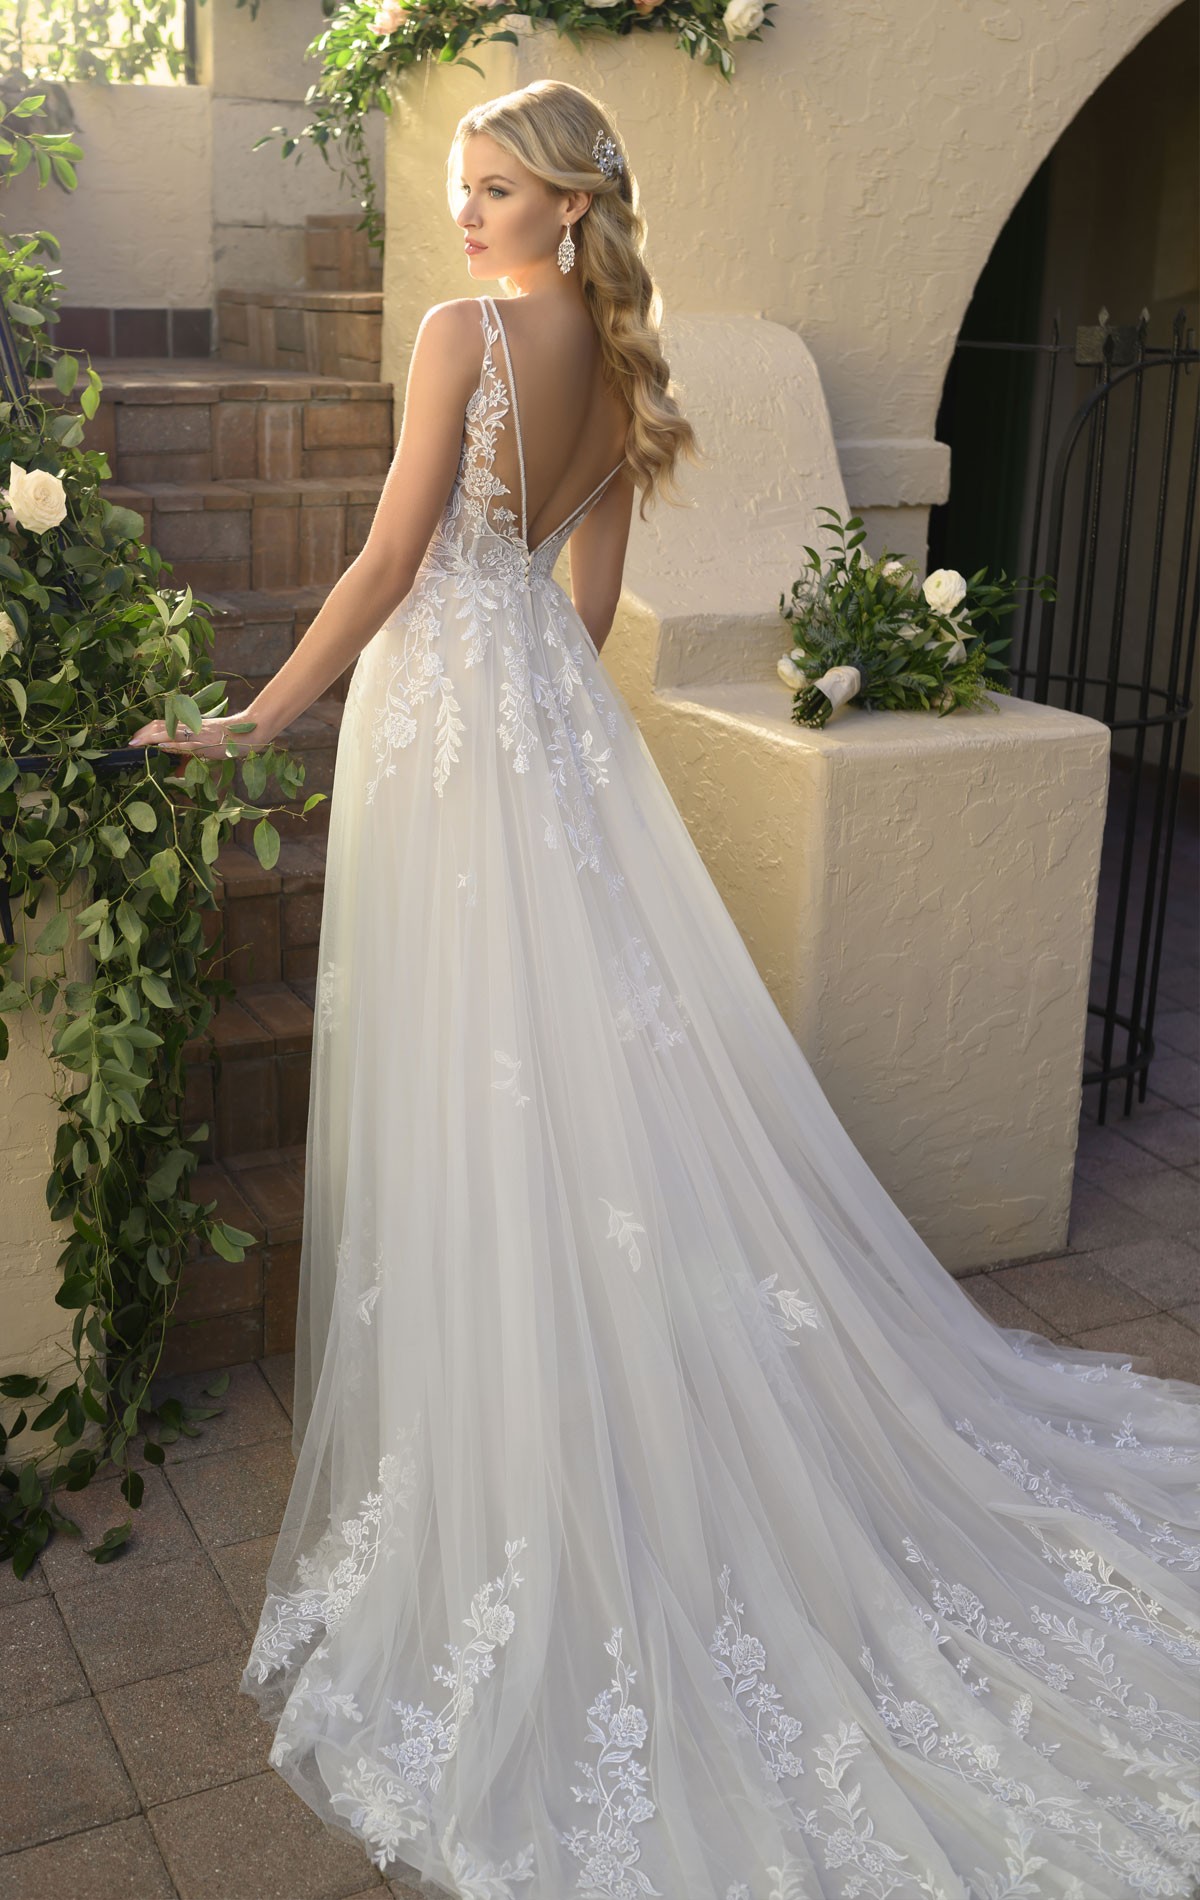 7083 - Sommer - Stella York 7083, Romantic Boho Floral lace & Tulle wedding dress with straps & v back at Blessings Bridal Boutique, Brighton. East Sussex. BN1 5GG. T: 01273 505766 E:info@blessingsbridal.co.uk